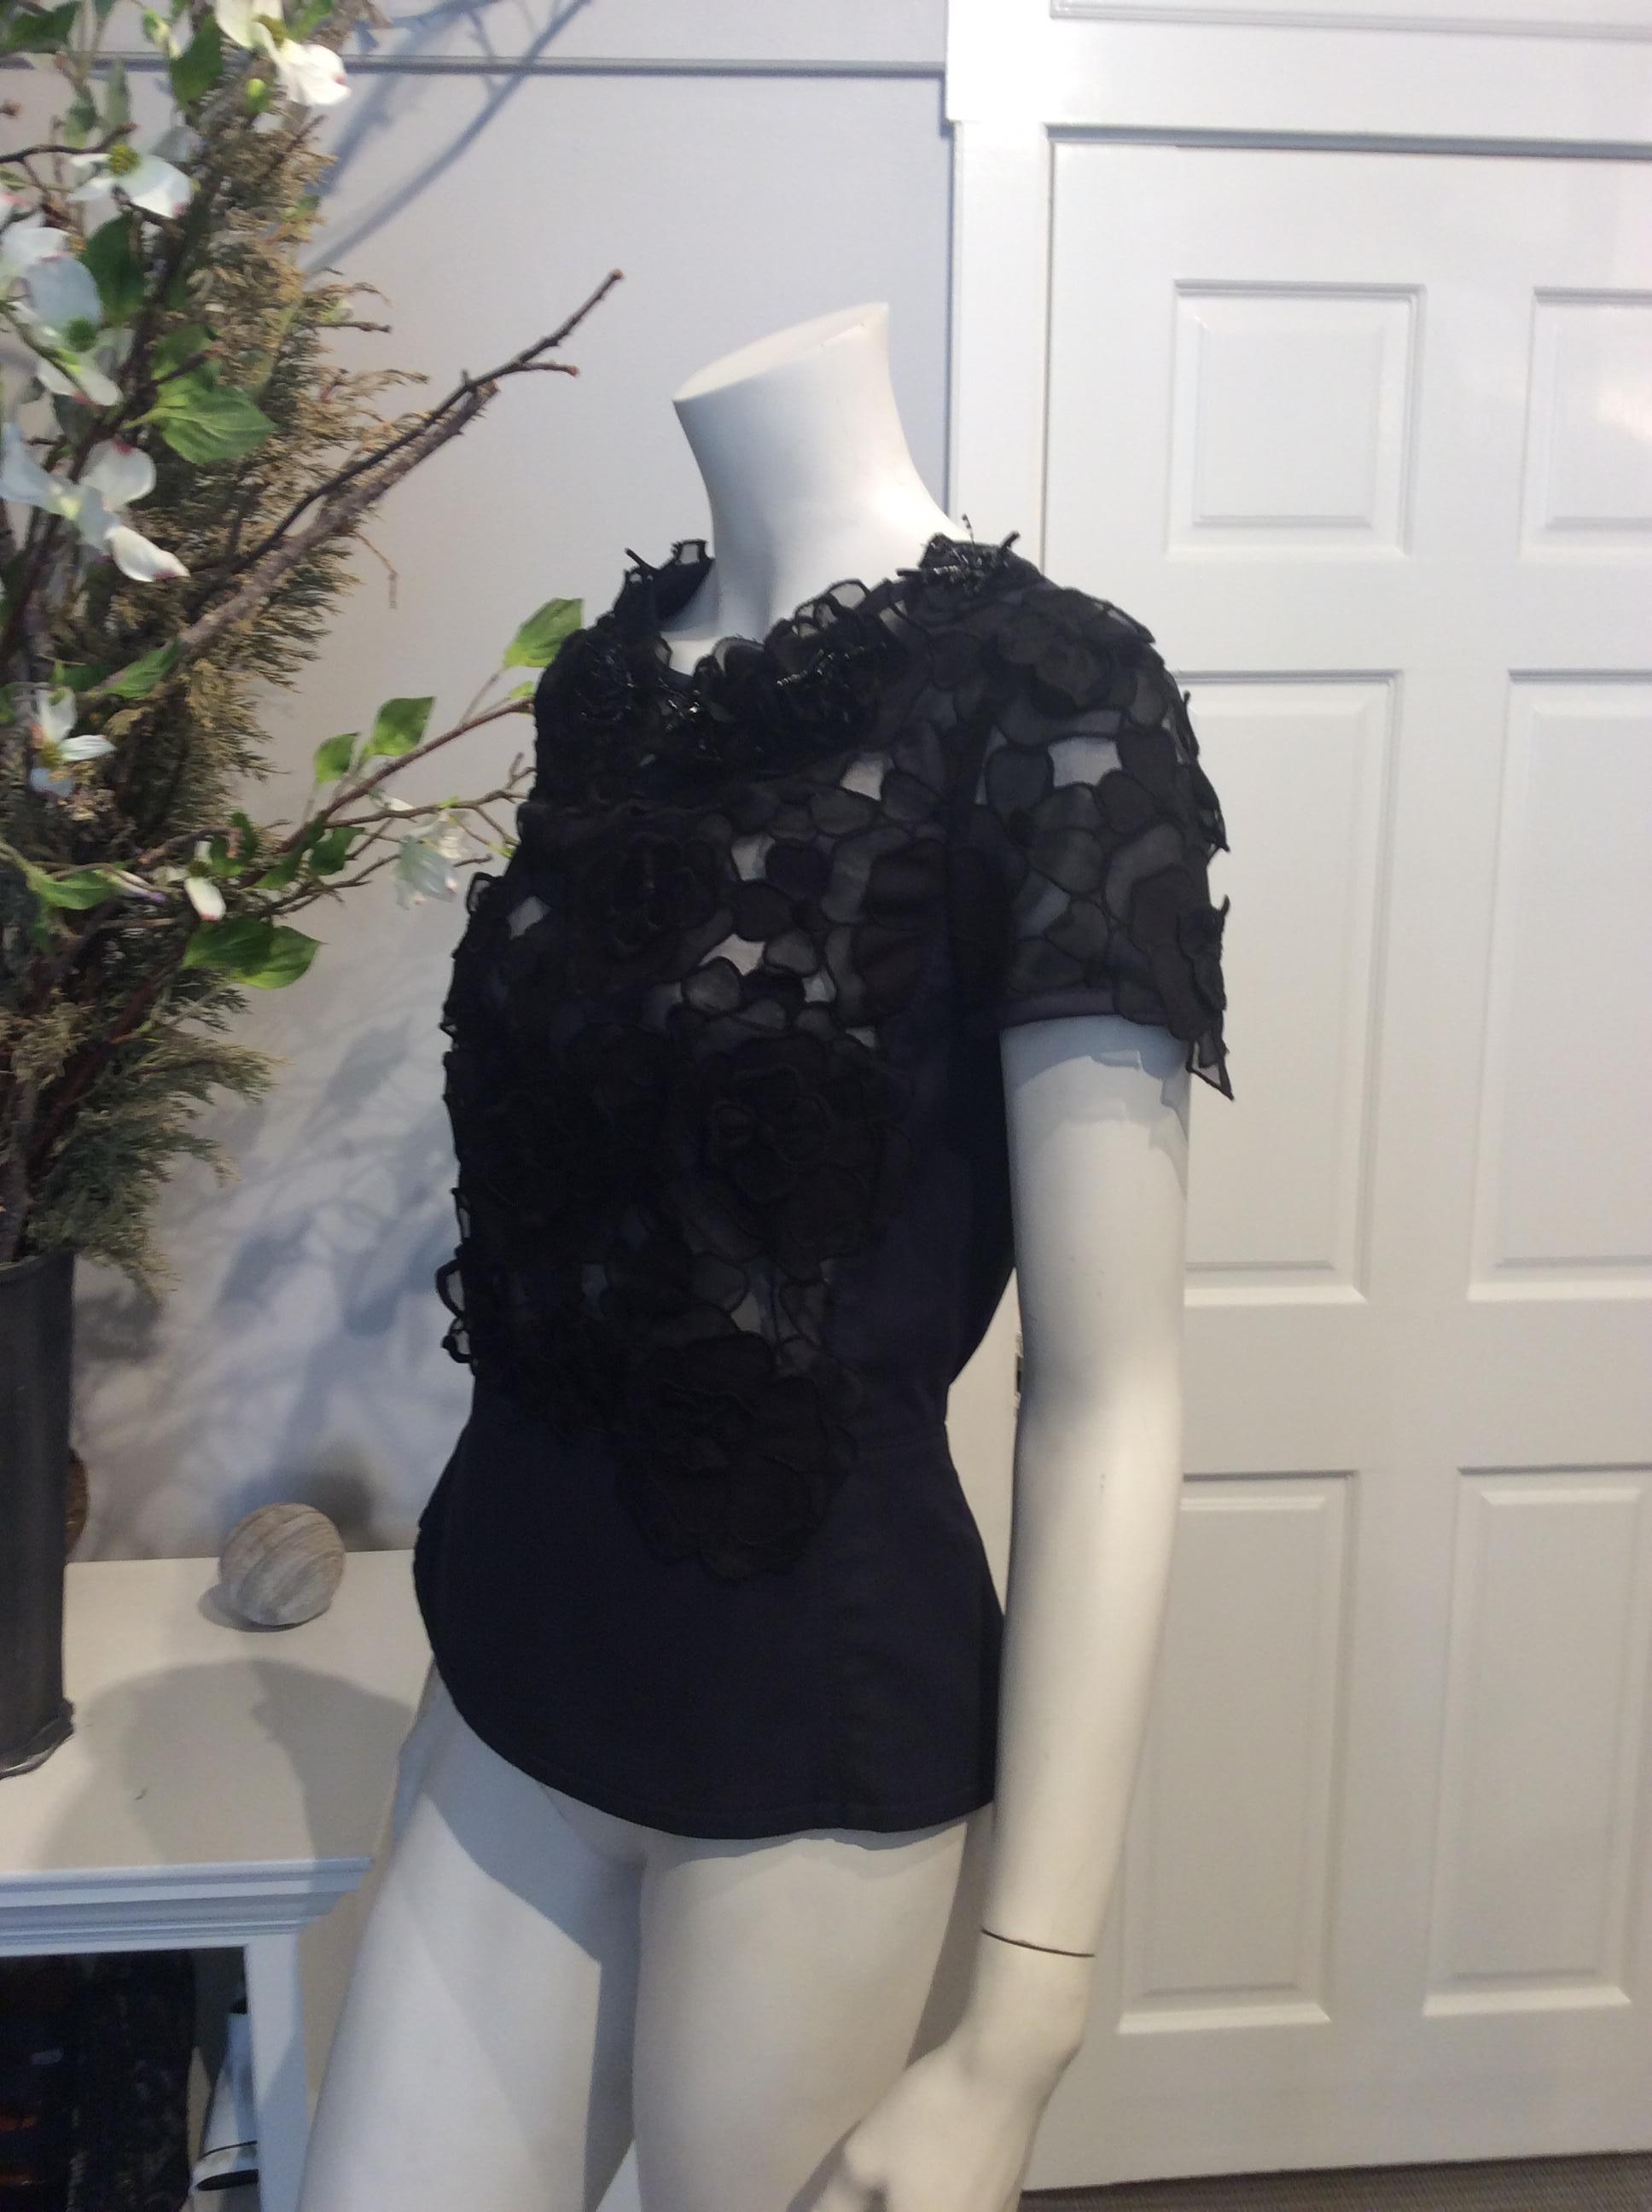 Women's Louis Vuitton Navy and Black Semi Sheer Top w/ Flowers and Beads Sz Fr38/Us6 For Sale